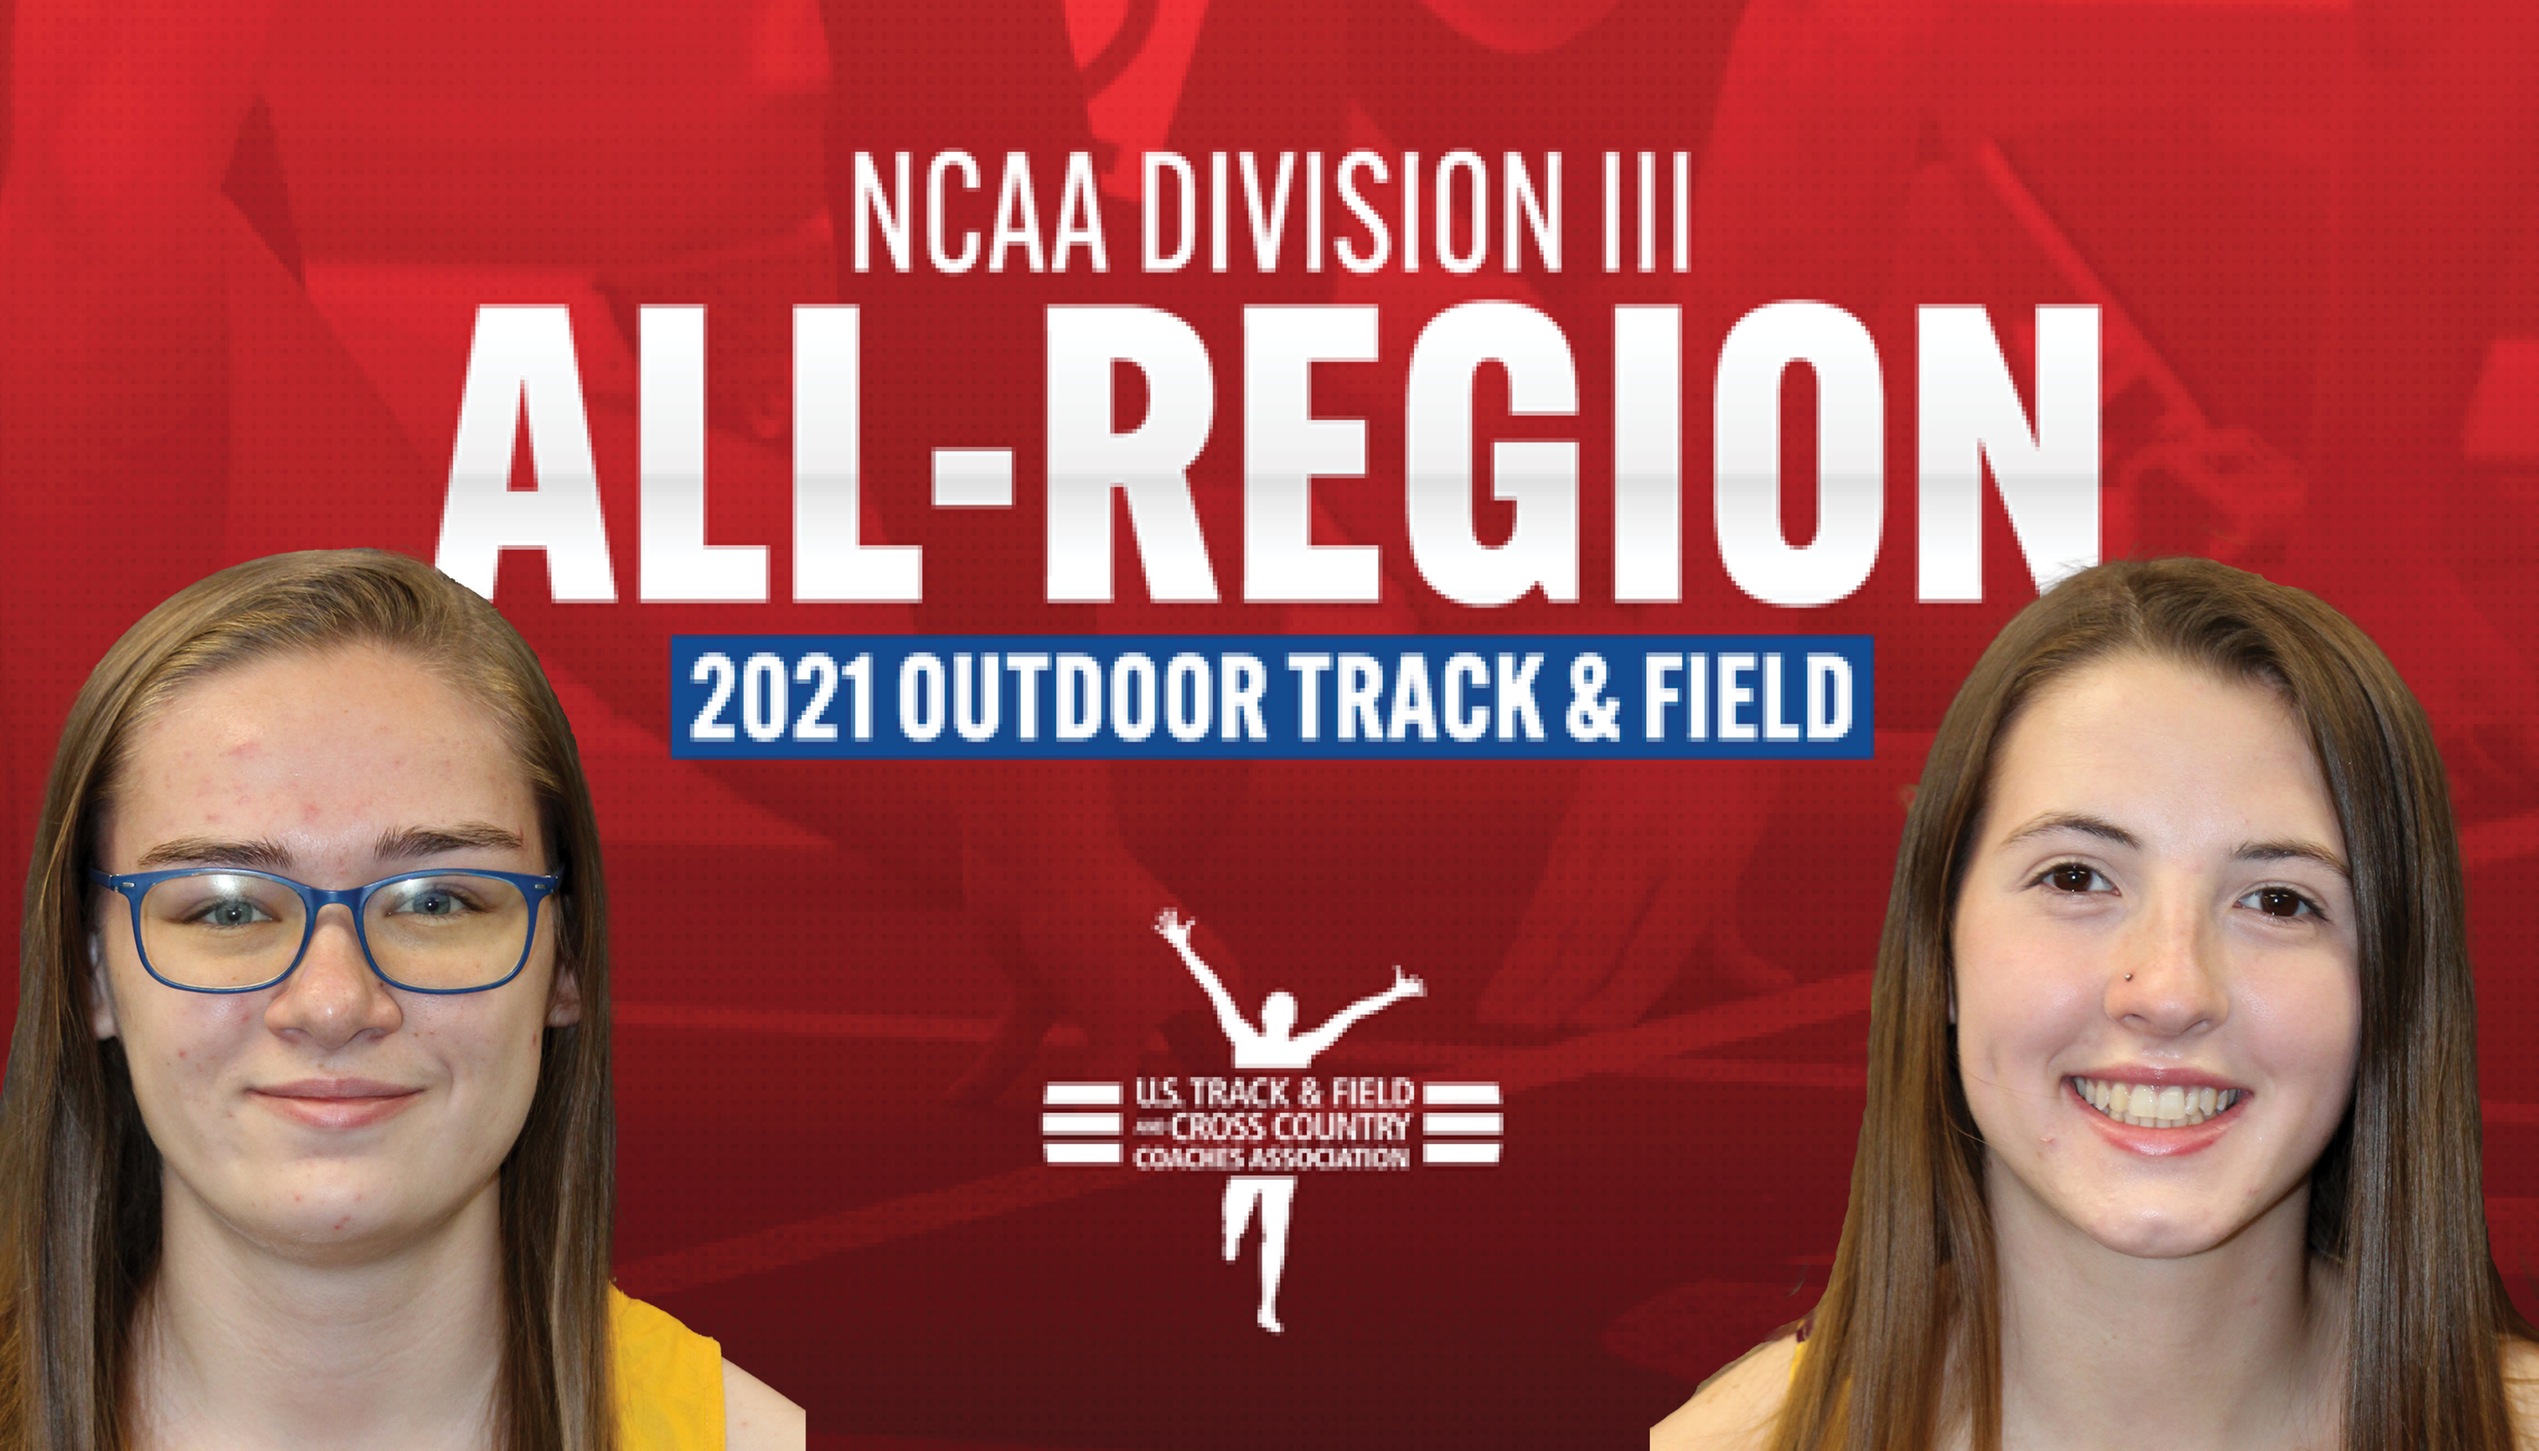 Emma Taggart and Marina Miketish have been named All-Region by the USTFCCCA